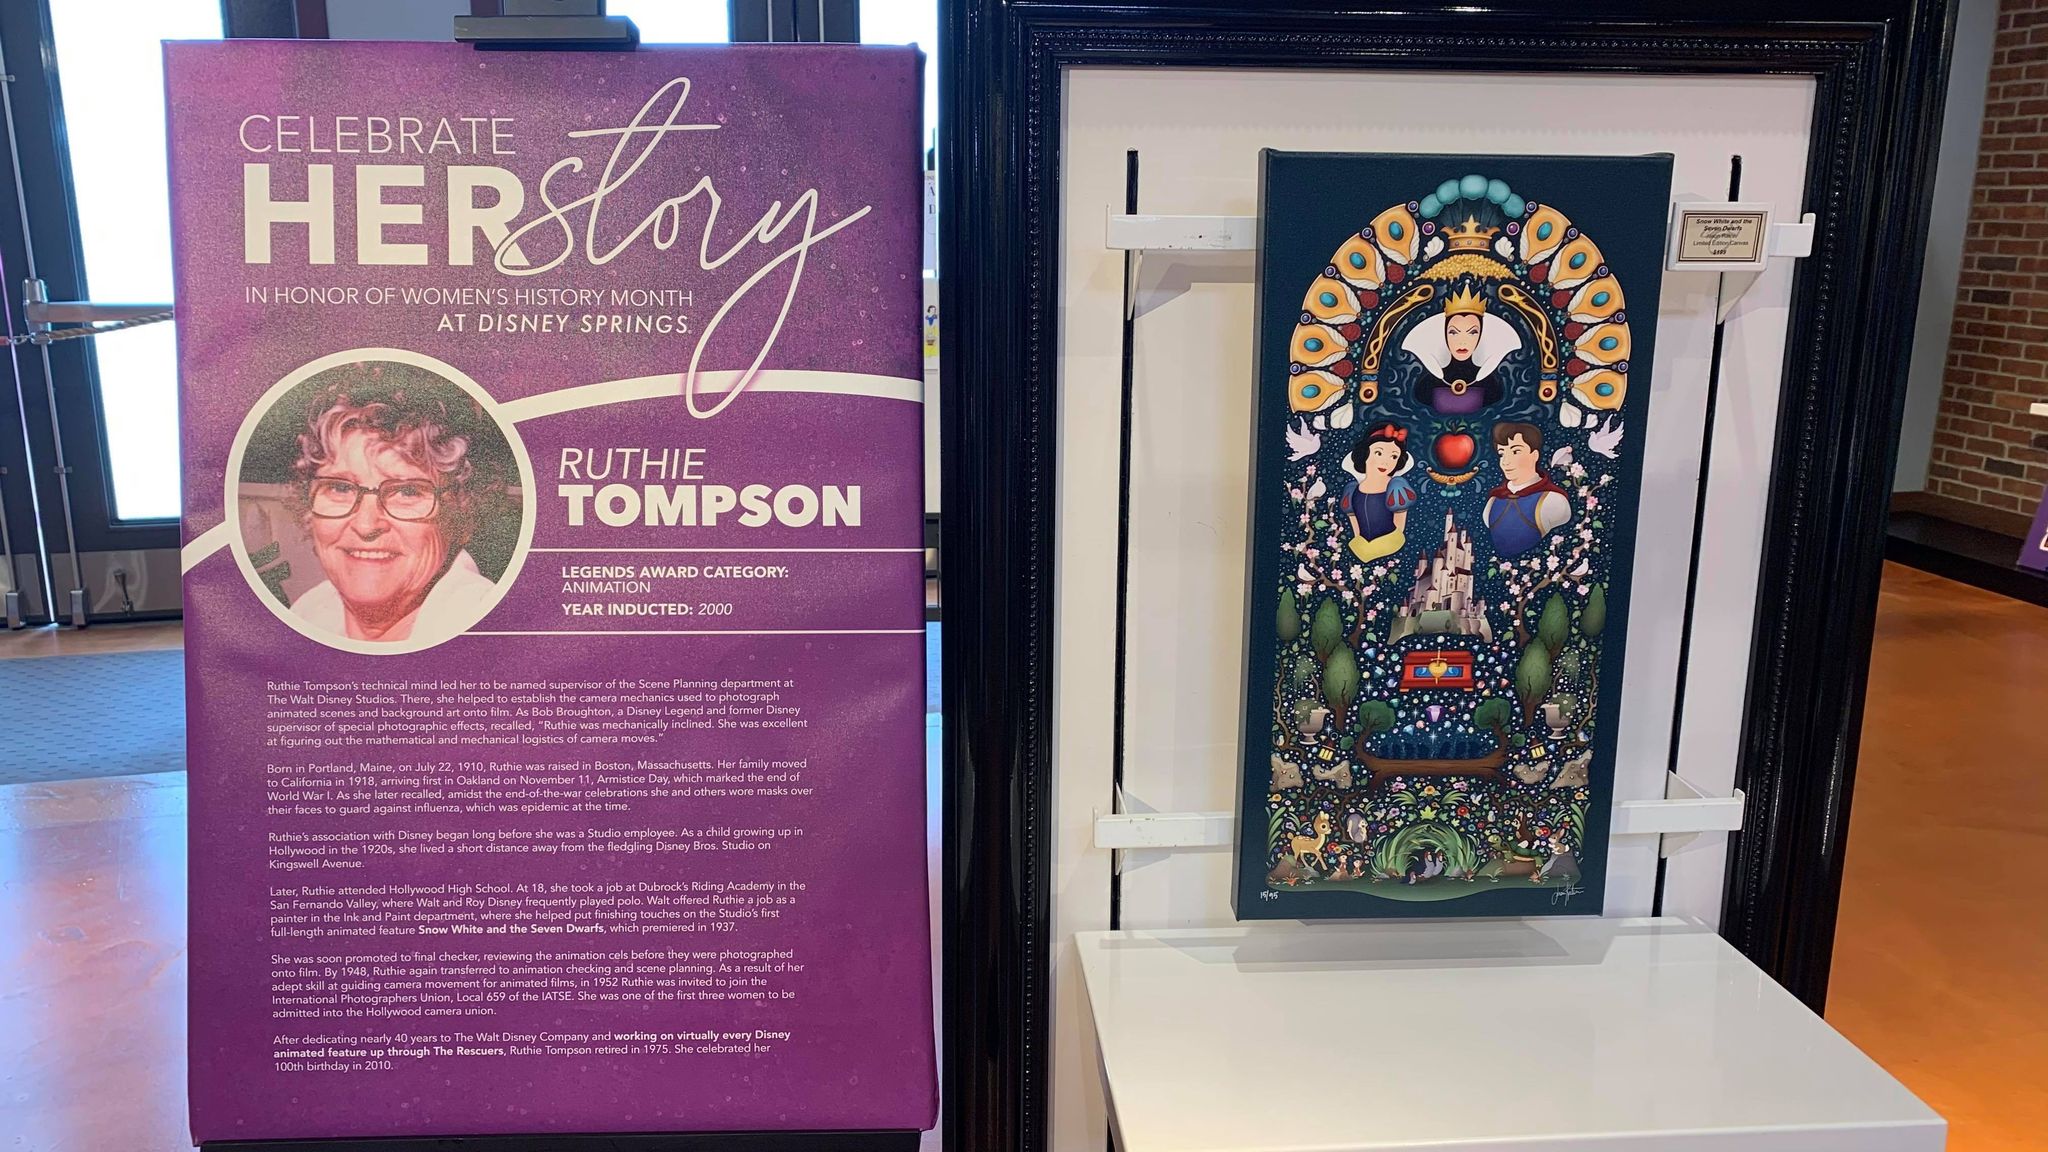 Celebrate “Herstory” at Disney Springs in March